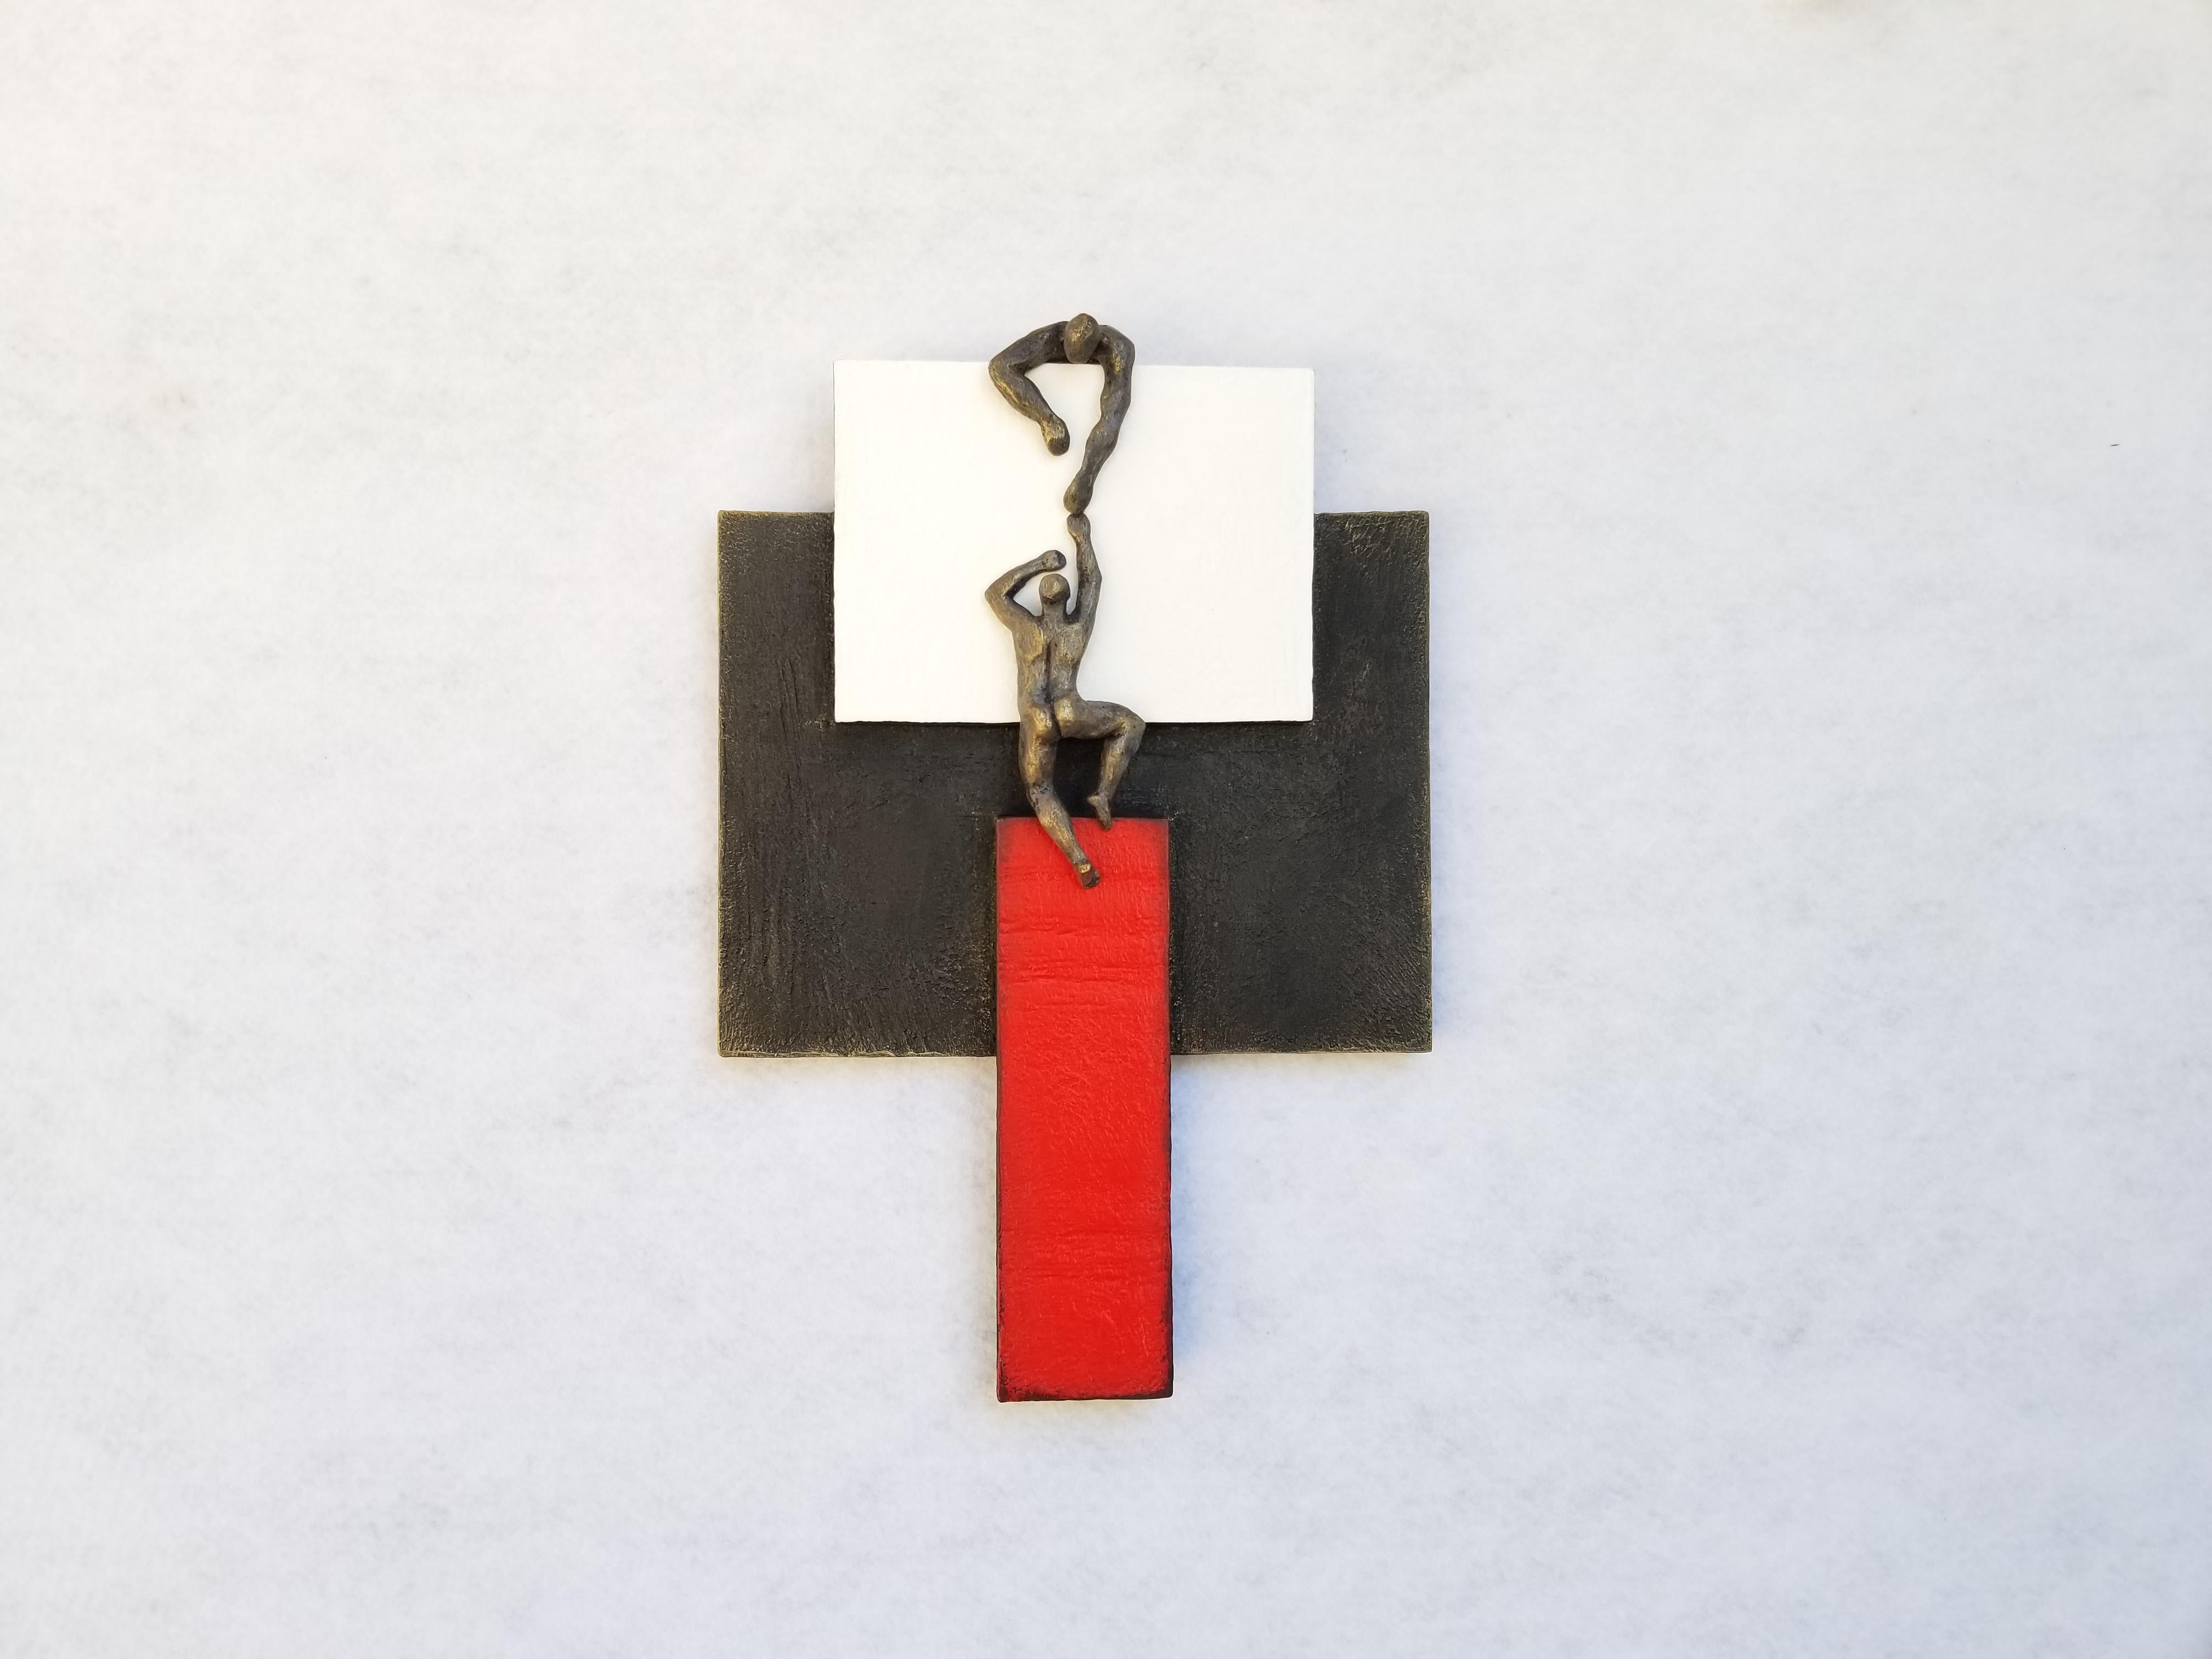 <p>Artist Comments<br>Inspired by Kazimir Malevich, artist Yelitza Diaz creates a modern piece using primary colors on geometric figures. She seeks to question the basic idea of minimalism, adding the human form to the composition. The subjects help